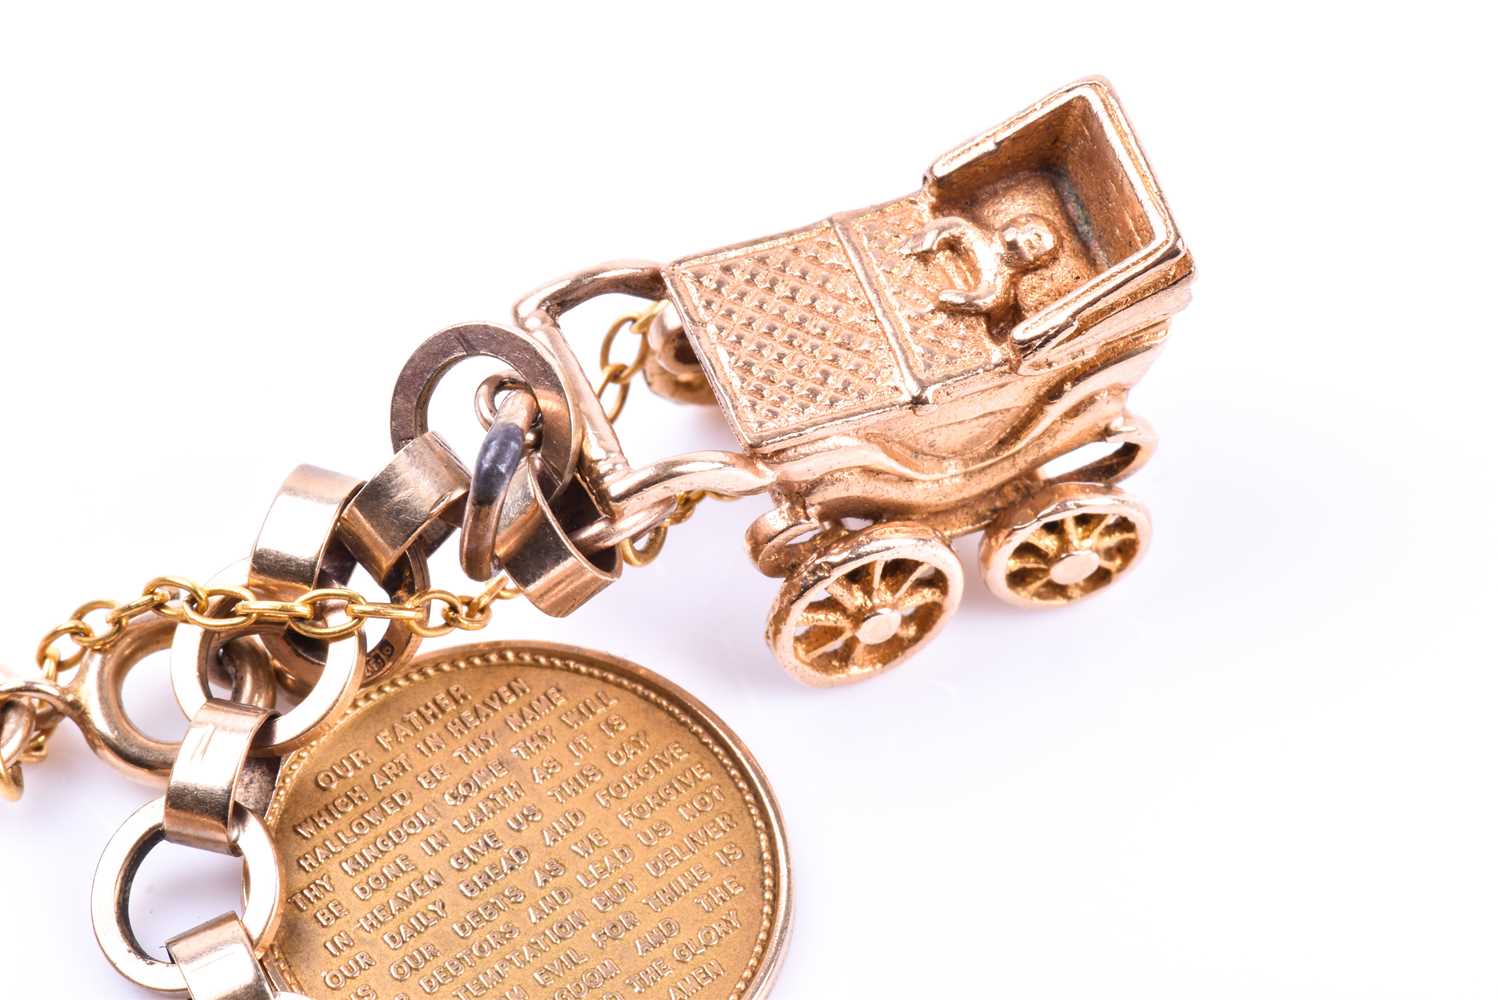 A 9ct yellow gold charm bracelet, suspended with various charms including a pram, a Paris charm, a - Image 3 of 5